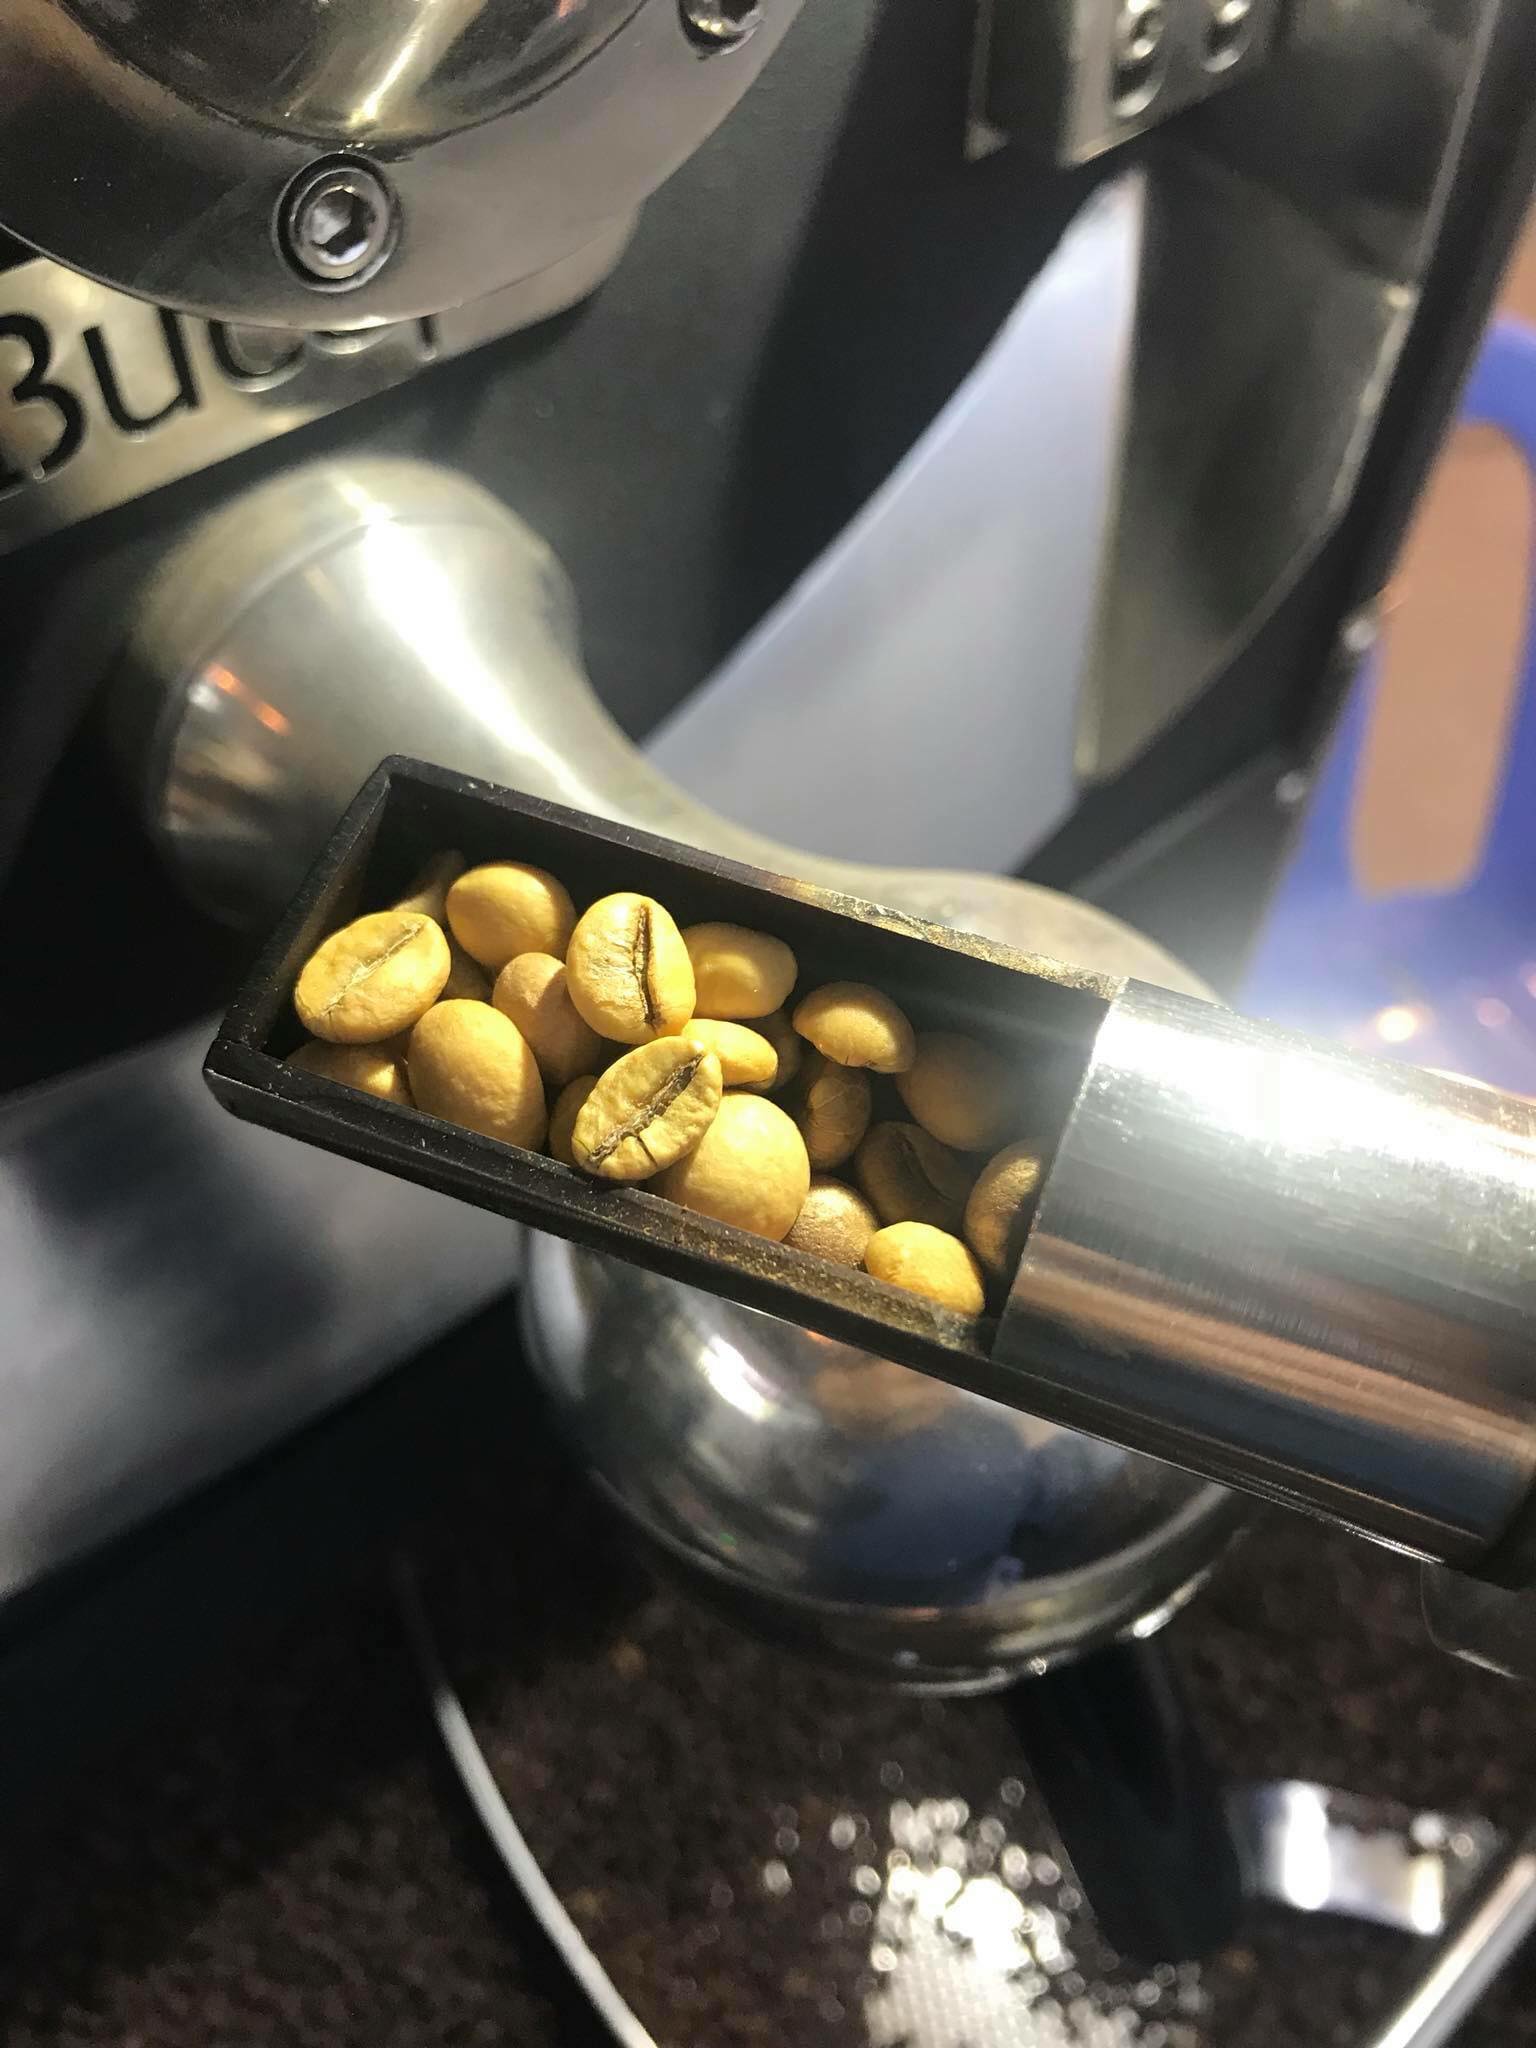 Bucep'roasting profile: optimize the natural flavor (aroma, body, sweetness, bitter, acidity...) of high quality coffee beans with no chemicals.
The roasted coffee are stored in a dedicated store for a certain amount of time, the coffee beans would be destroyed the bad emissions that they have absorbed from the roasting processing.